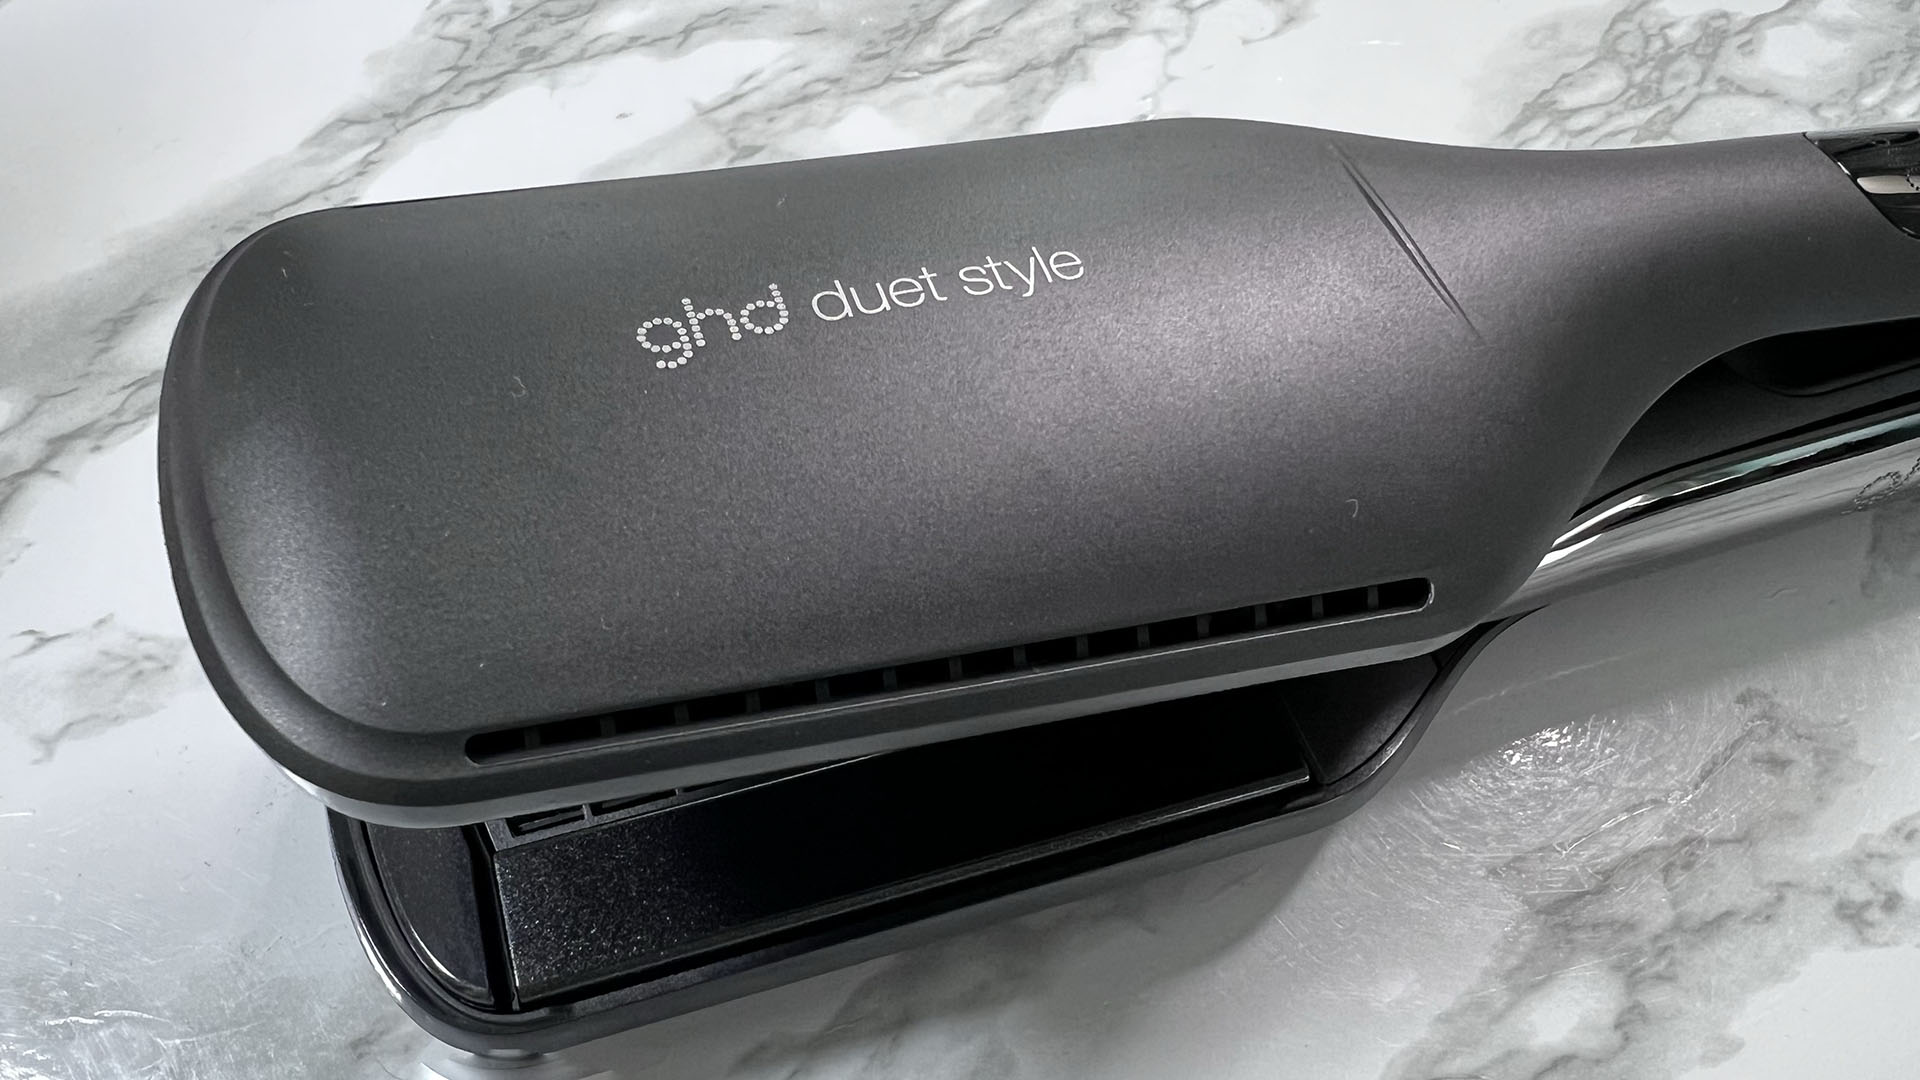 GHD Duet Style hair styler in reviewer's home